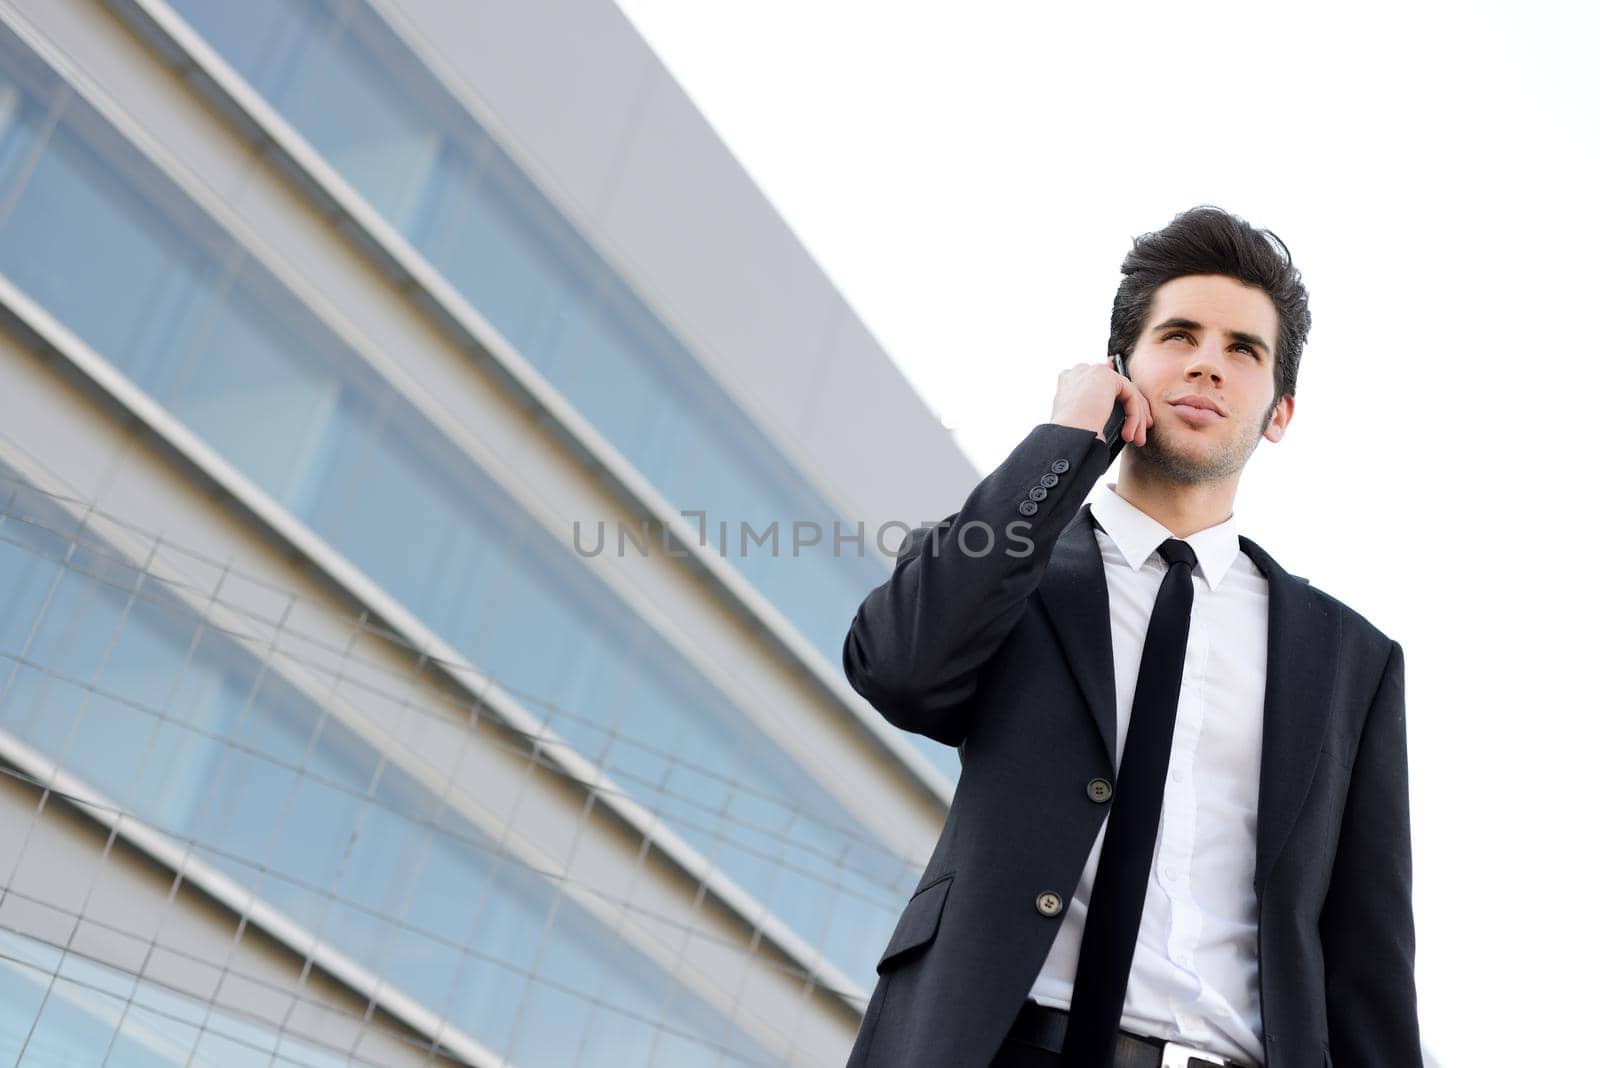 Attractive young businessman on the phone in an office building by javiindy